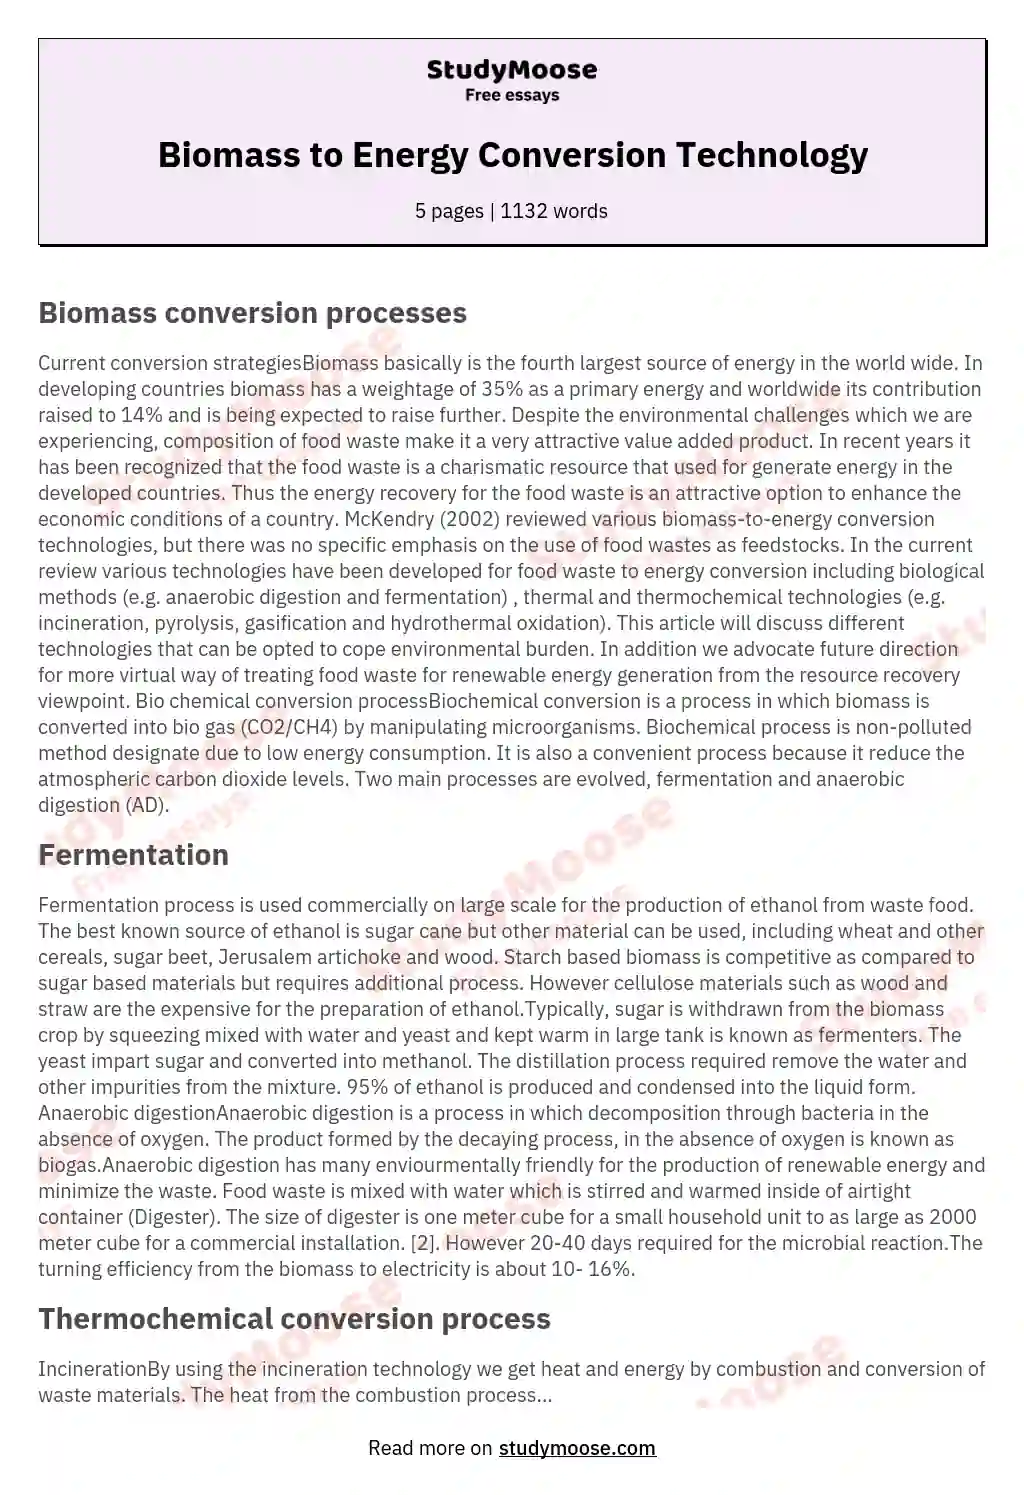 Biomass to Energy Conversion Technology